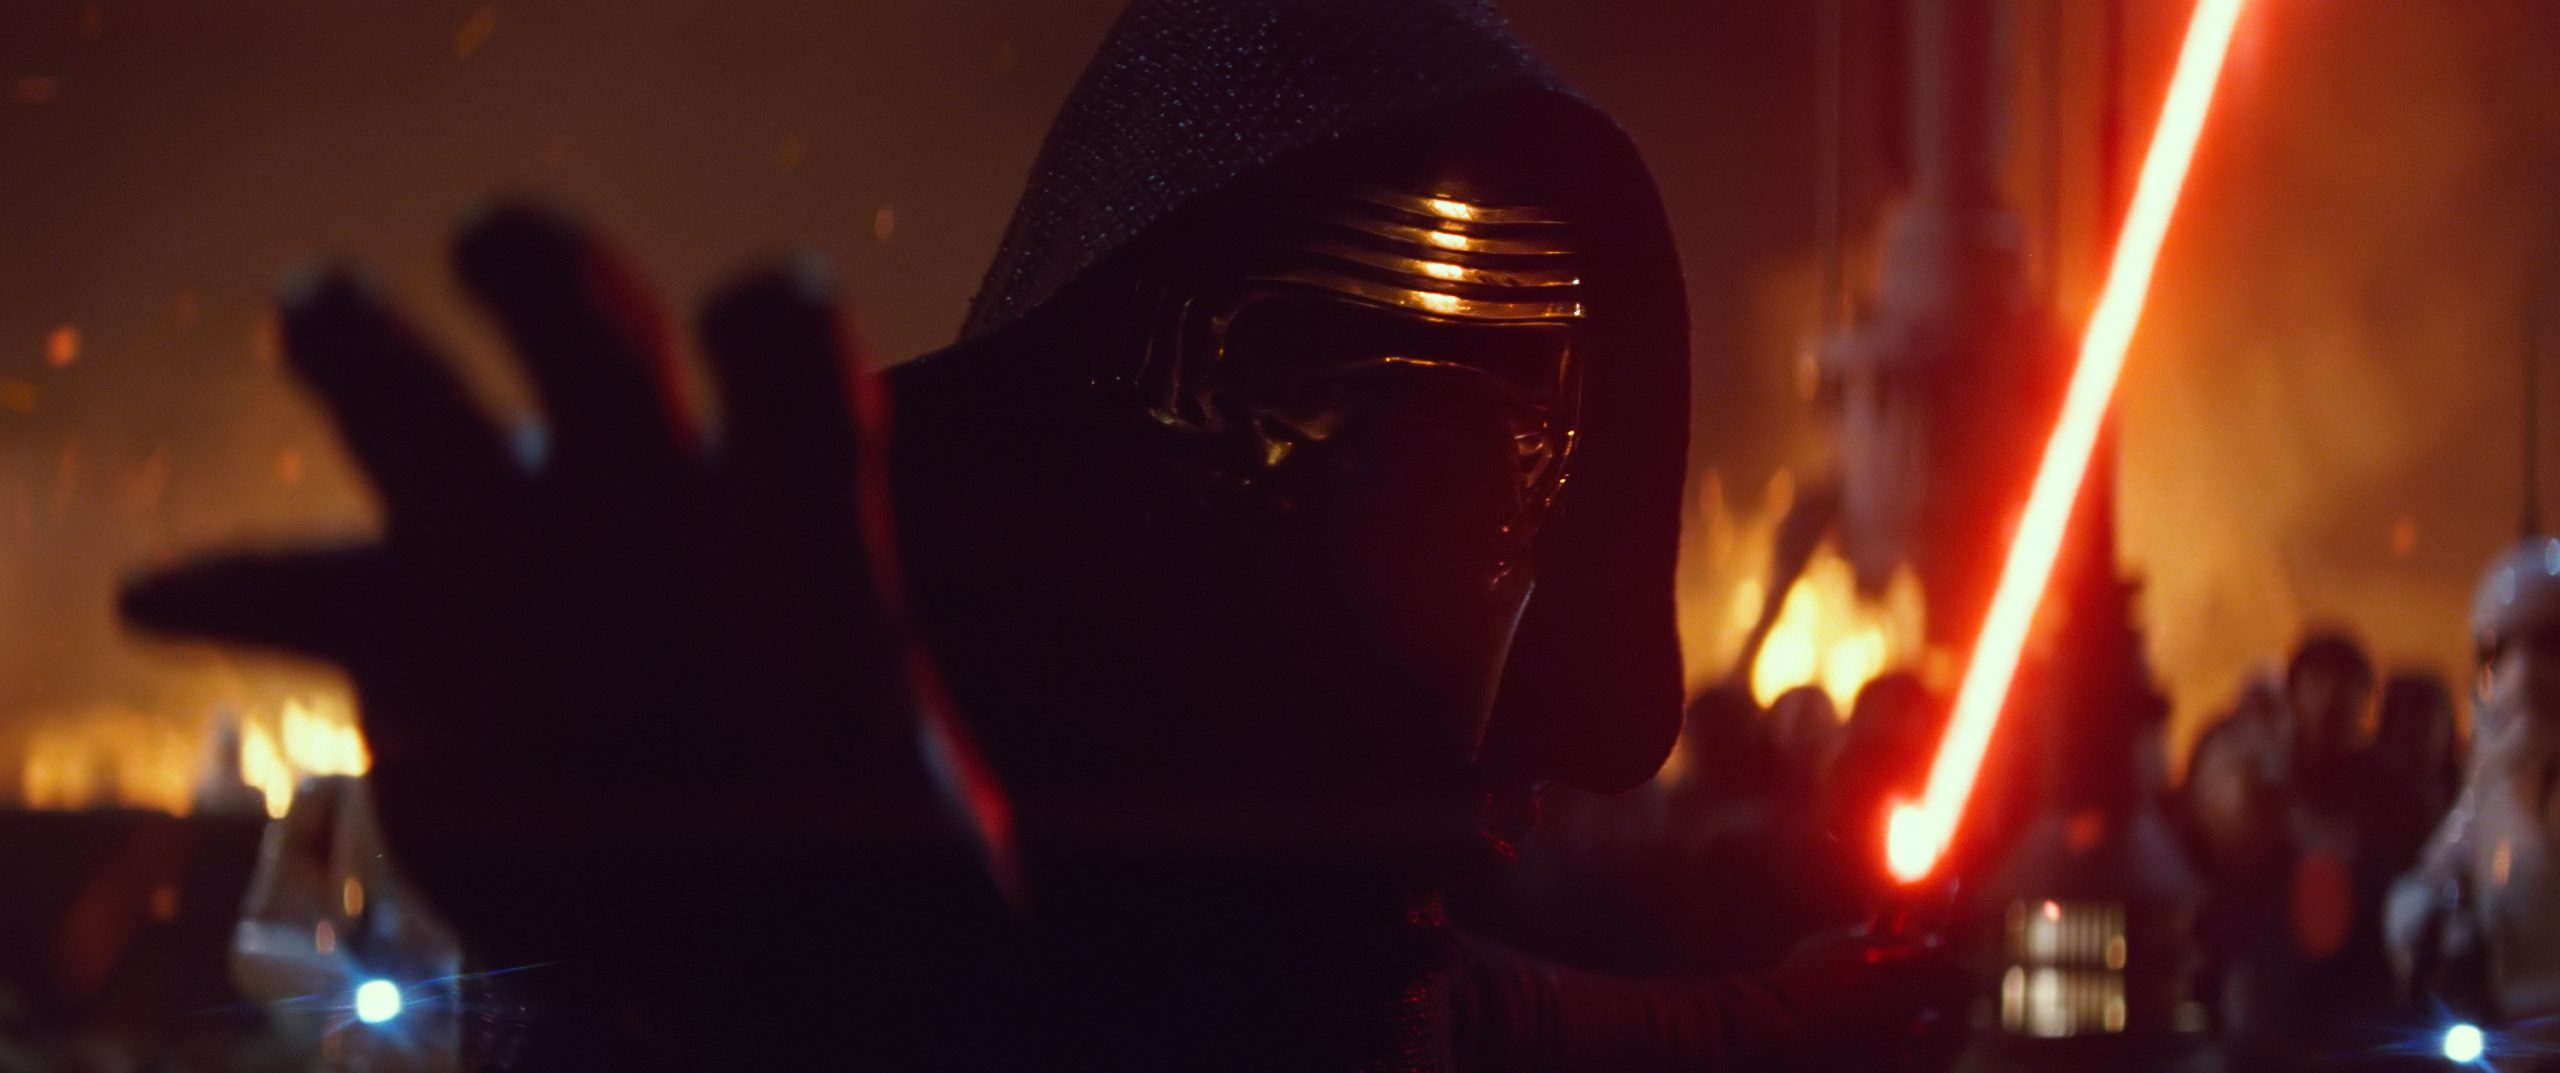 Star Wars: The Force Awakens - Vanity Fair Reveals Who's Playing Kylo Ren and Captain Phasma